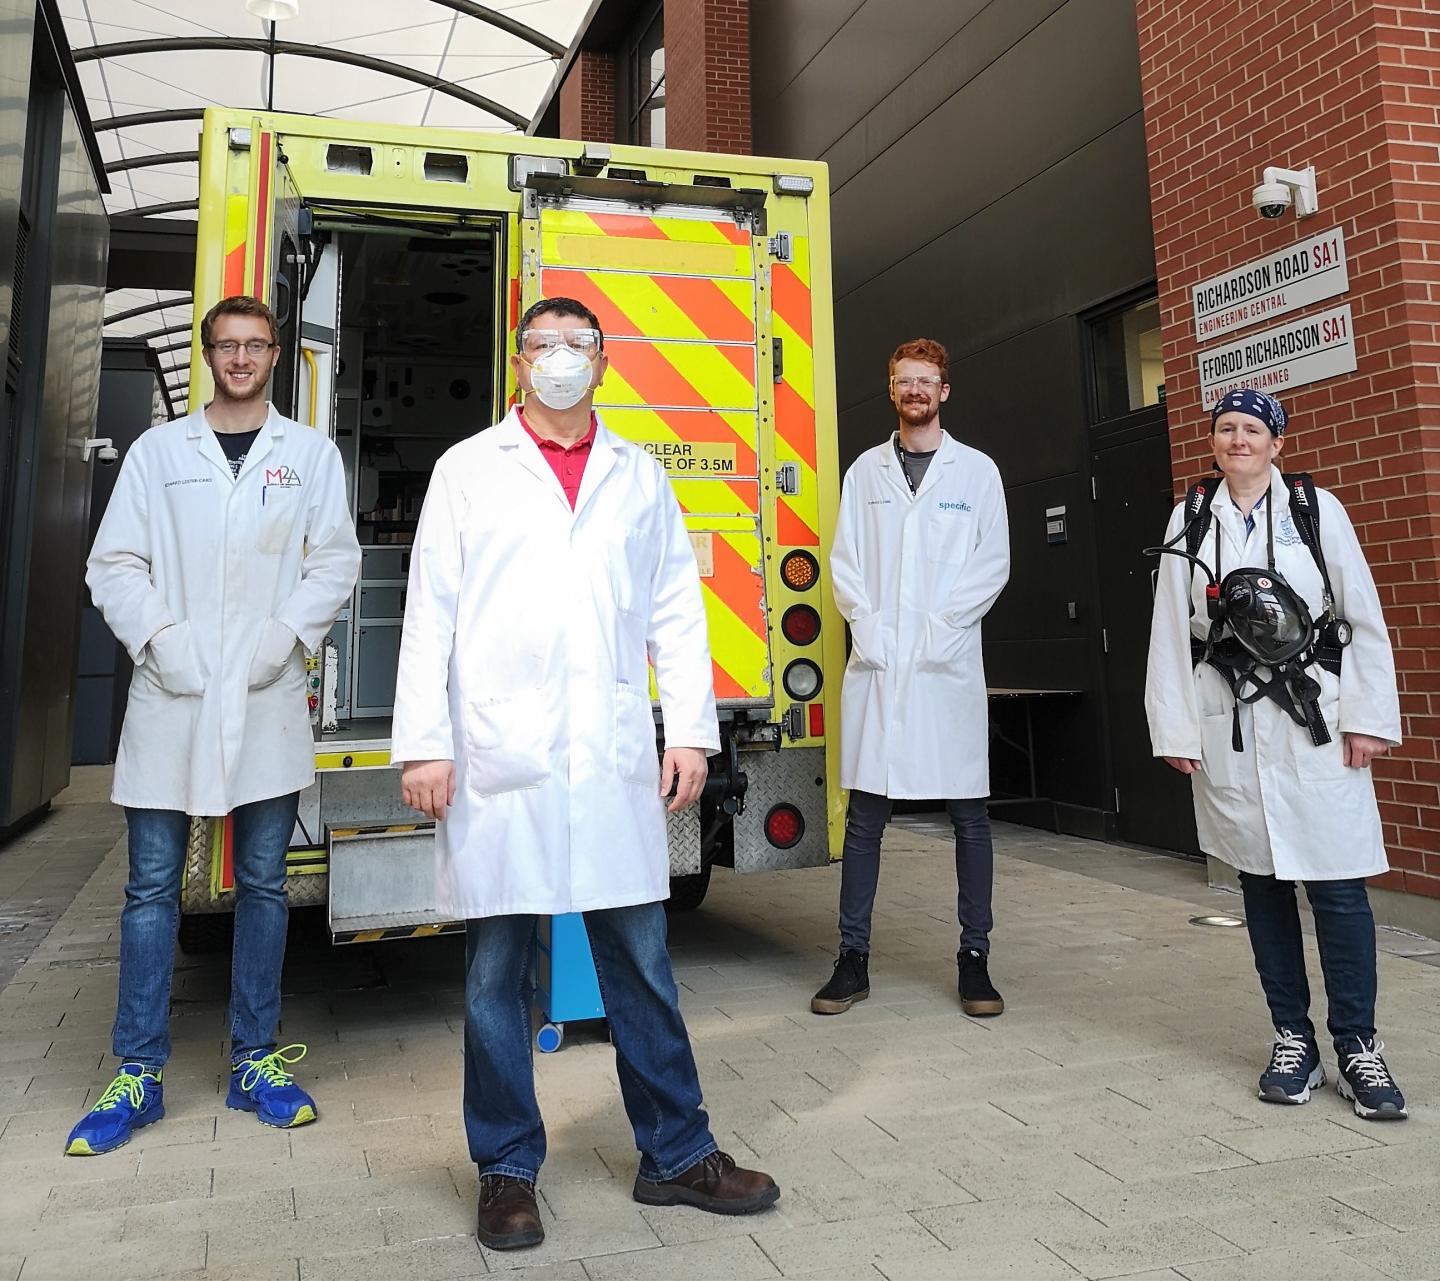 Rapid-Release Gases to Speed up Deep Clean of Ambulances